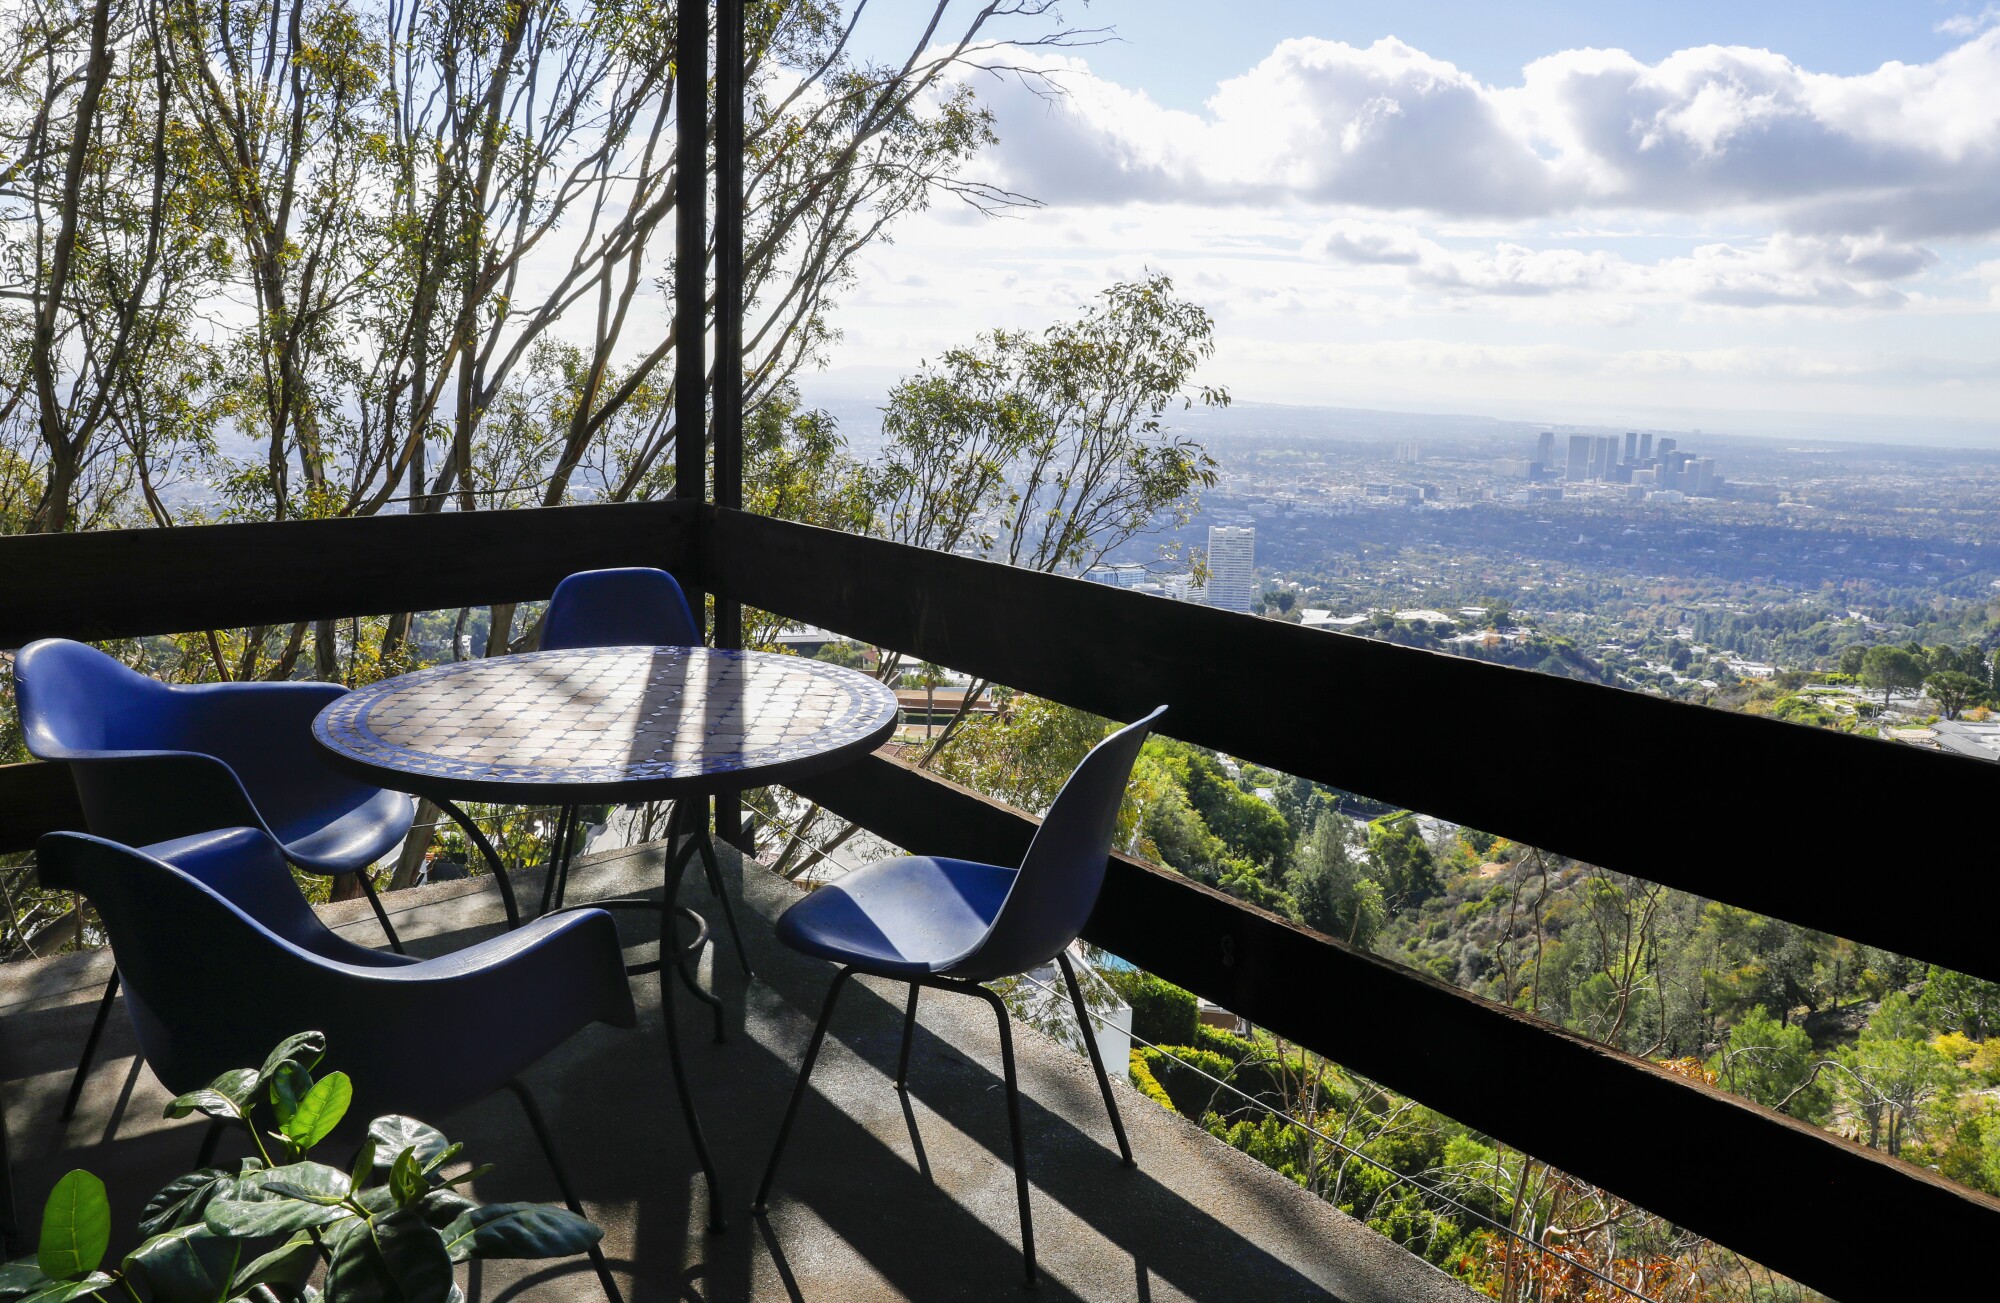 A view of the Los Angeles Basin on a sunny day after a rain from the deck of Bernard Judge's Tree House